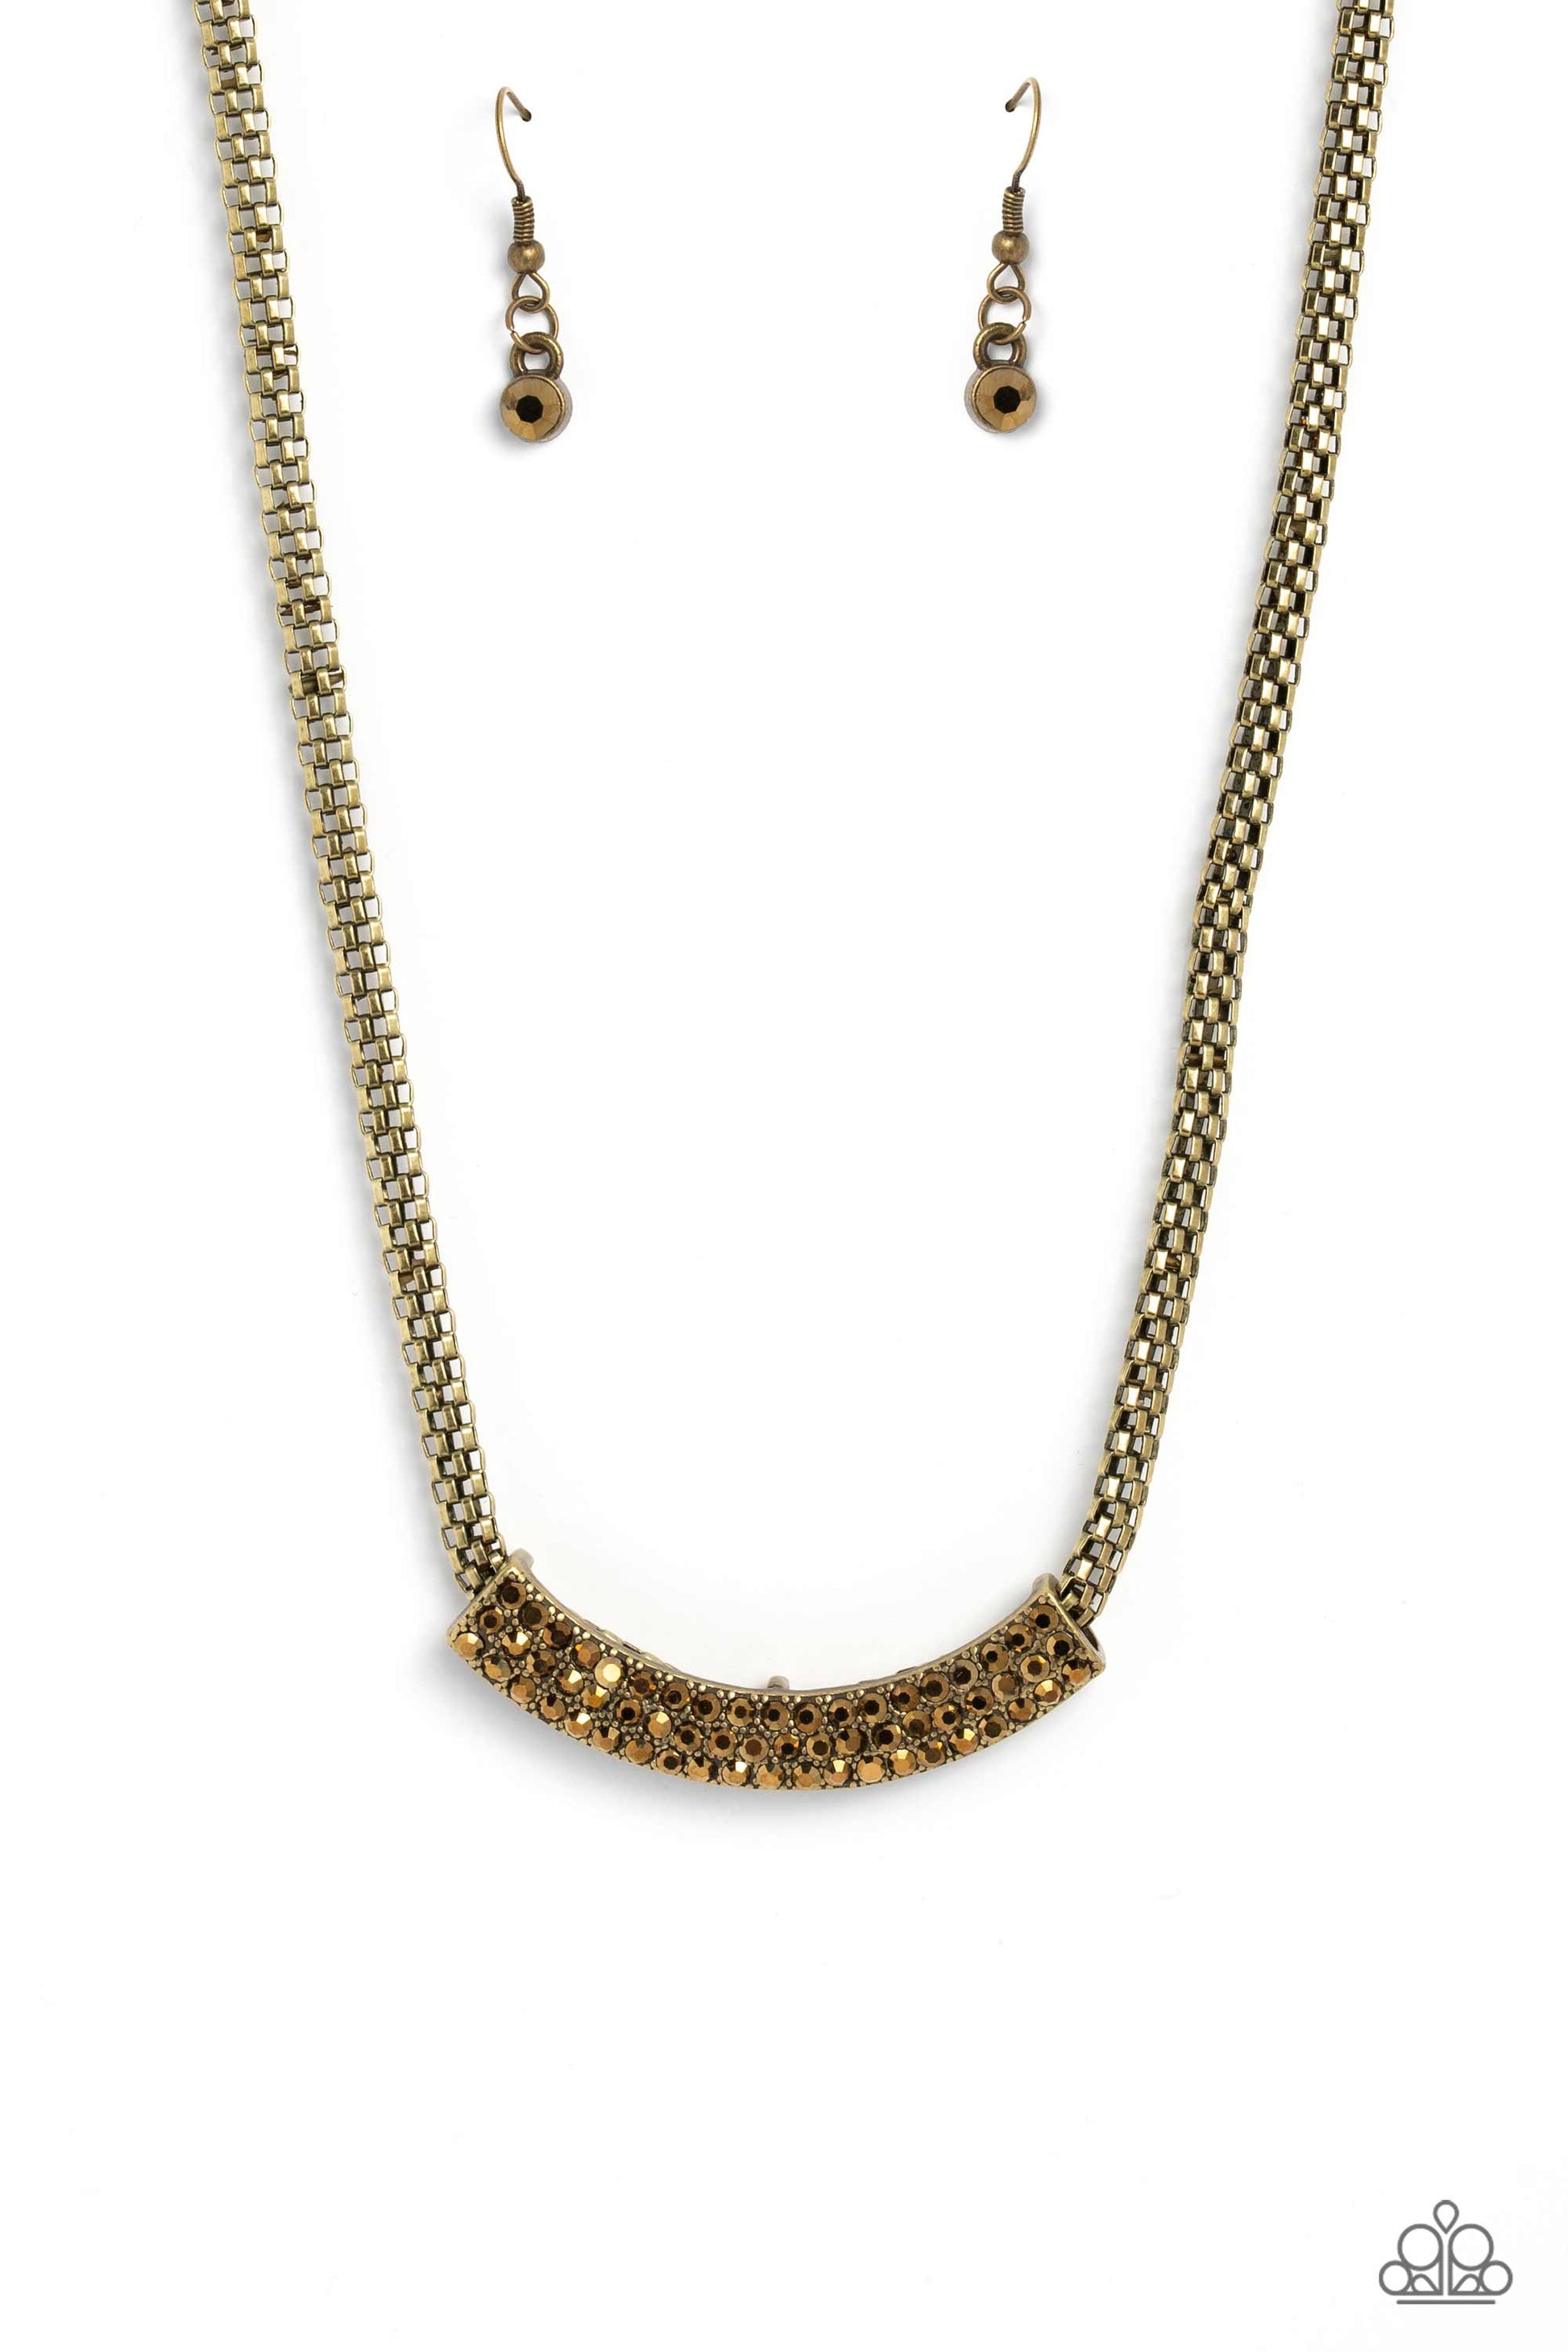 Paparazzi Accessories - Swing Dance Dream - Brass Necklaces featuring a gritty finish, a curved brass pendant slides along a rounded brass mesh chain below the collar. Three rows of dainty aurum rhinestones encrusted along the brass frame, add hints of shimmer to the bold industrial palette. Features an adjustable clasp closure.  Sold as one individual necklace. Includes one pair of matching earrings.